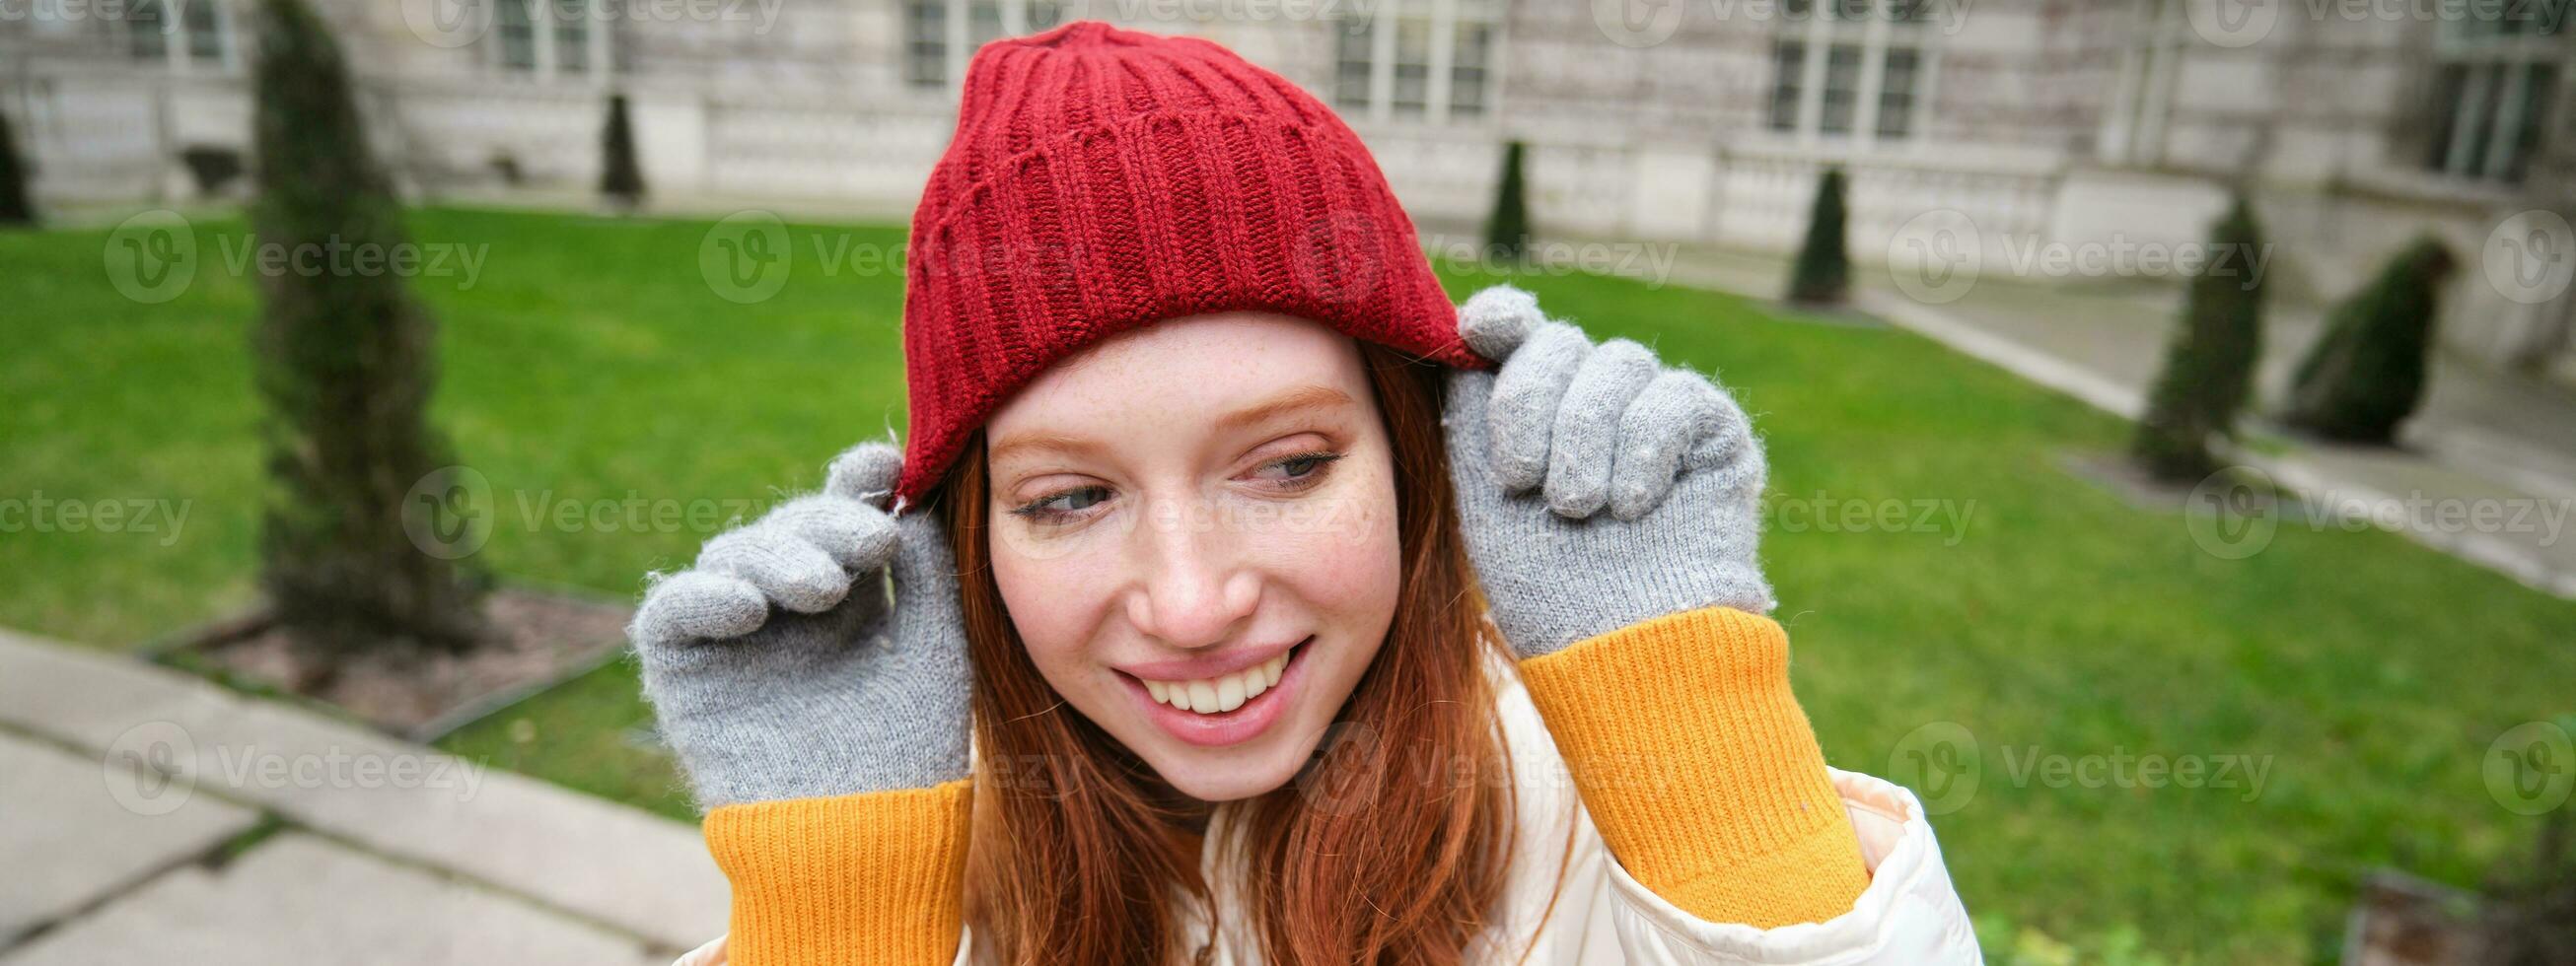 Cute girl student in red hat, warm gloves, sits in park, smiles and looks happy. photo